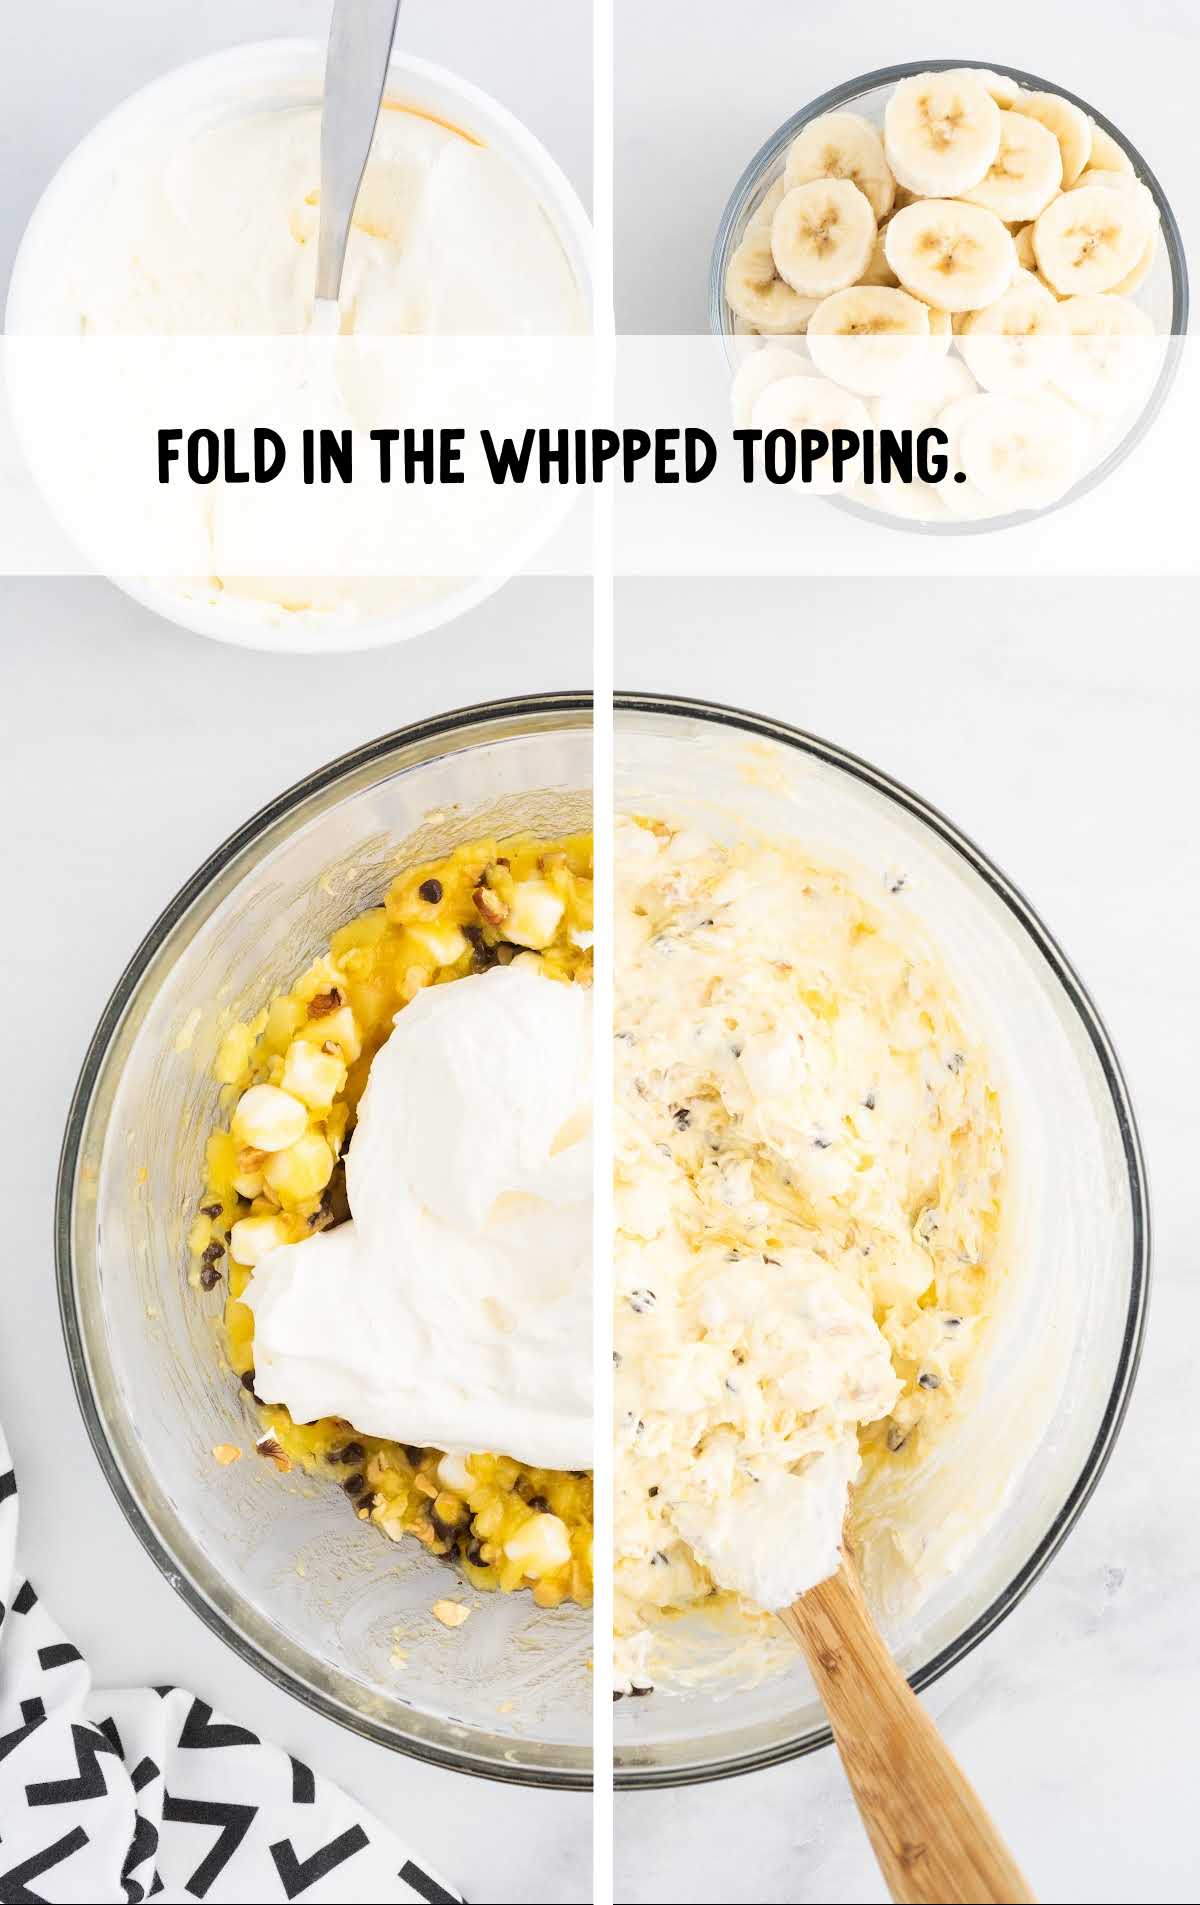 whipped topping added to the marshmallows mixture in a bowl